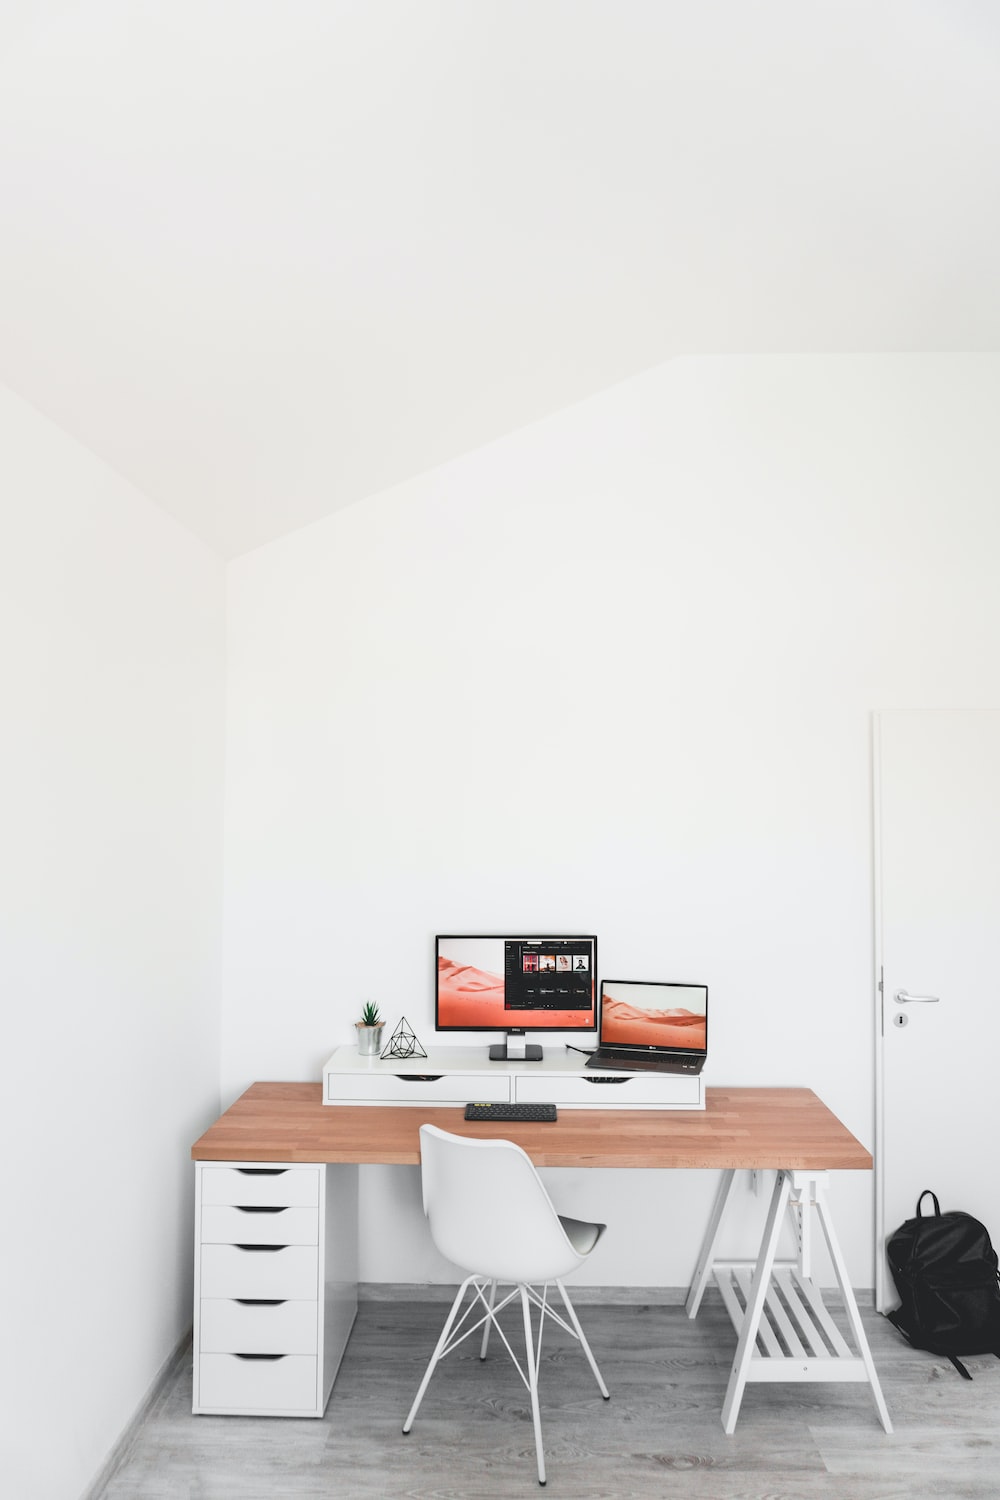 What is the difference between writing desk and computer desk?